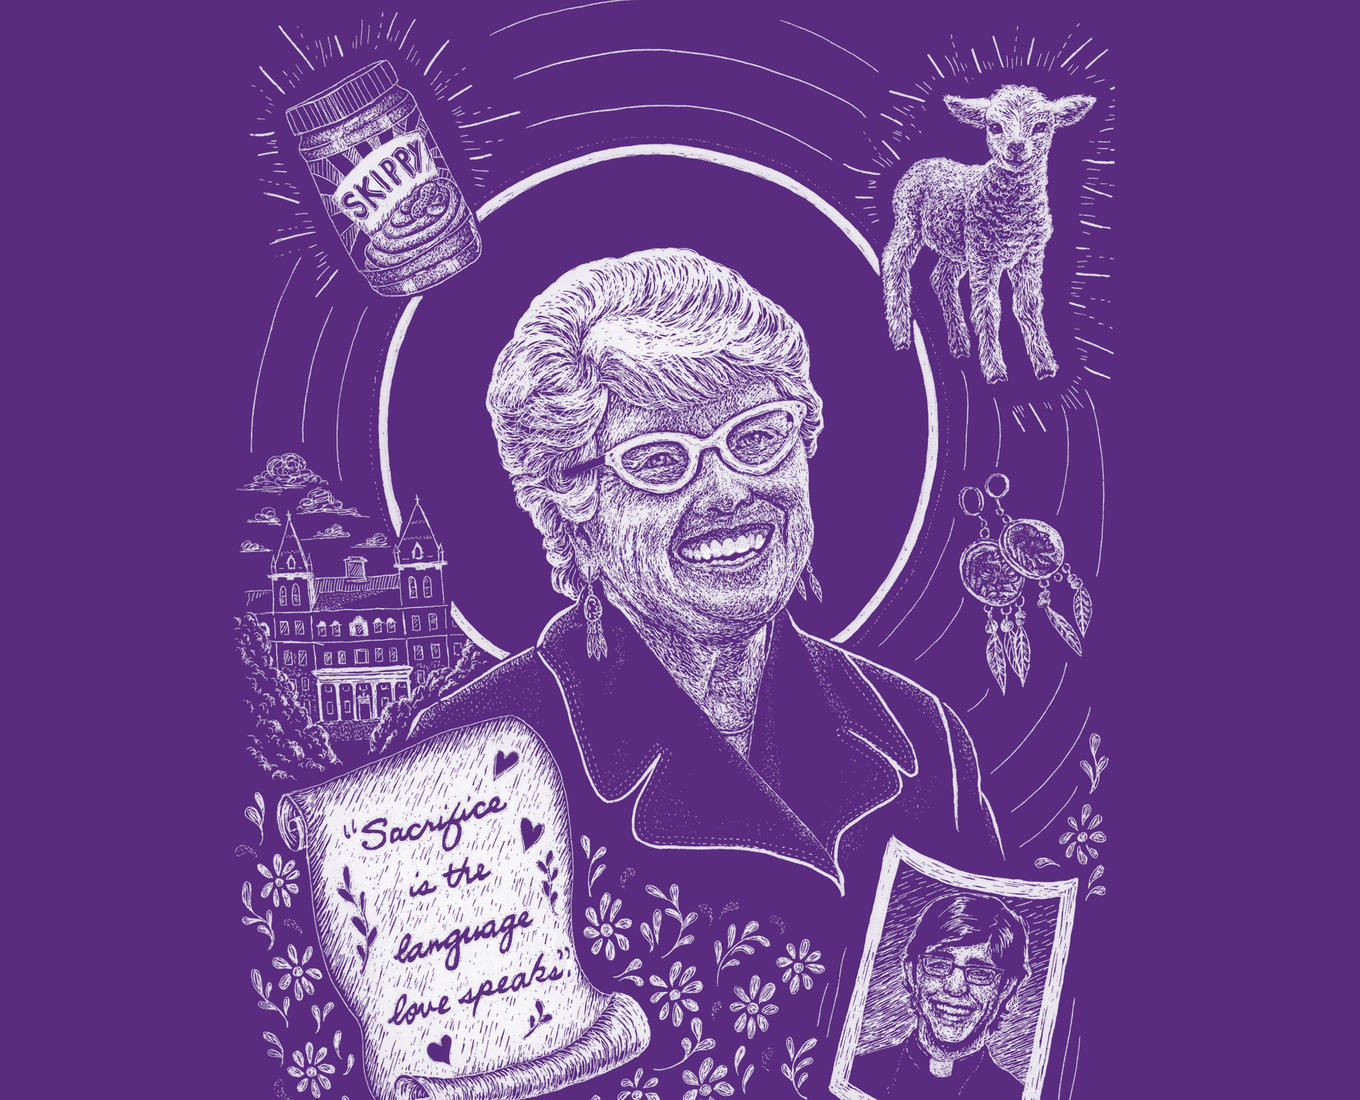 Scratchboard illustration of a white haired woman with glasses.